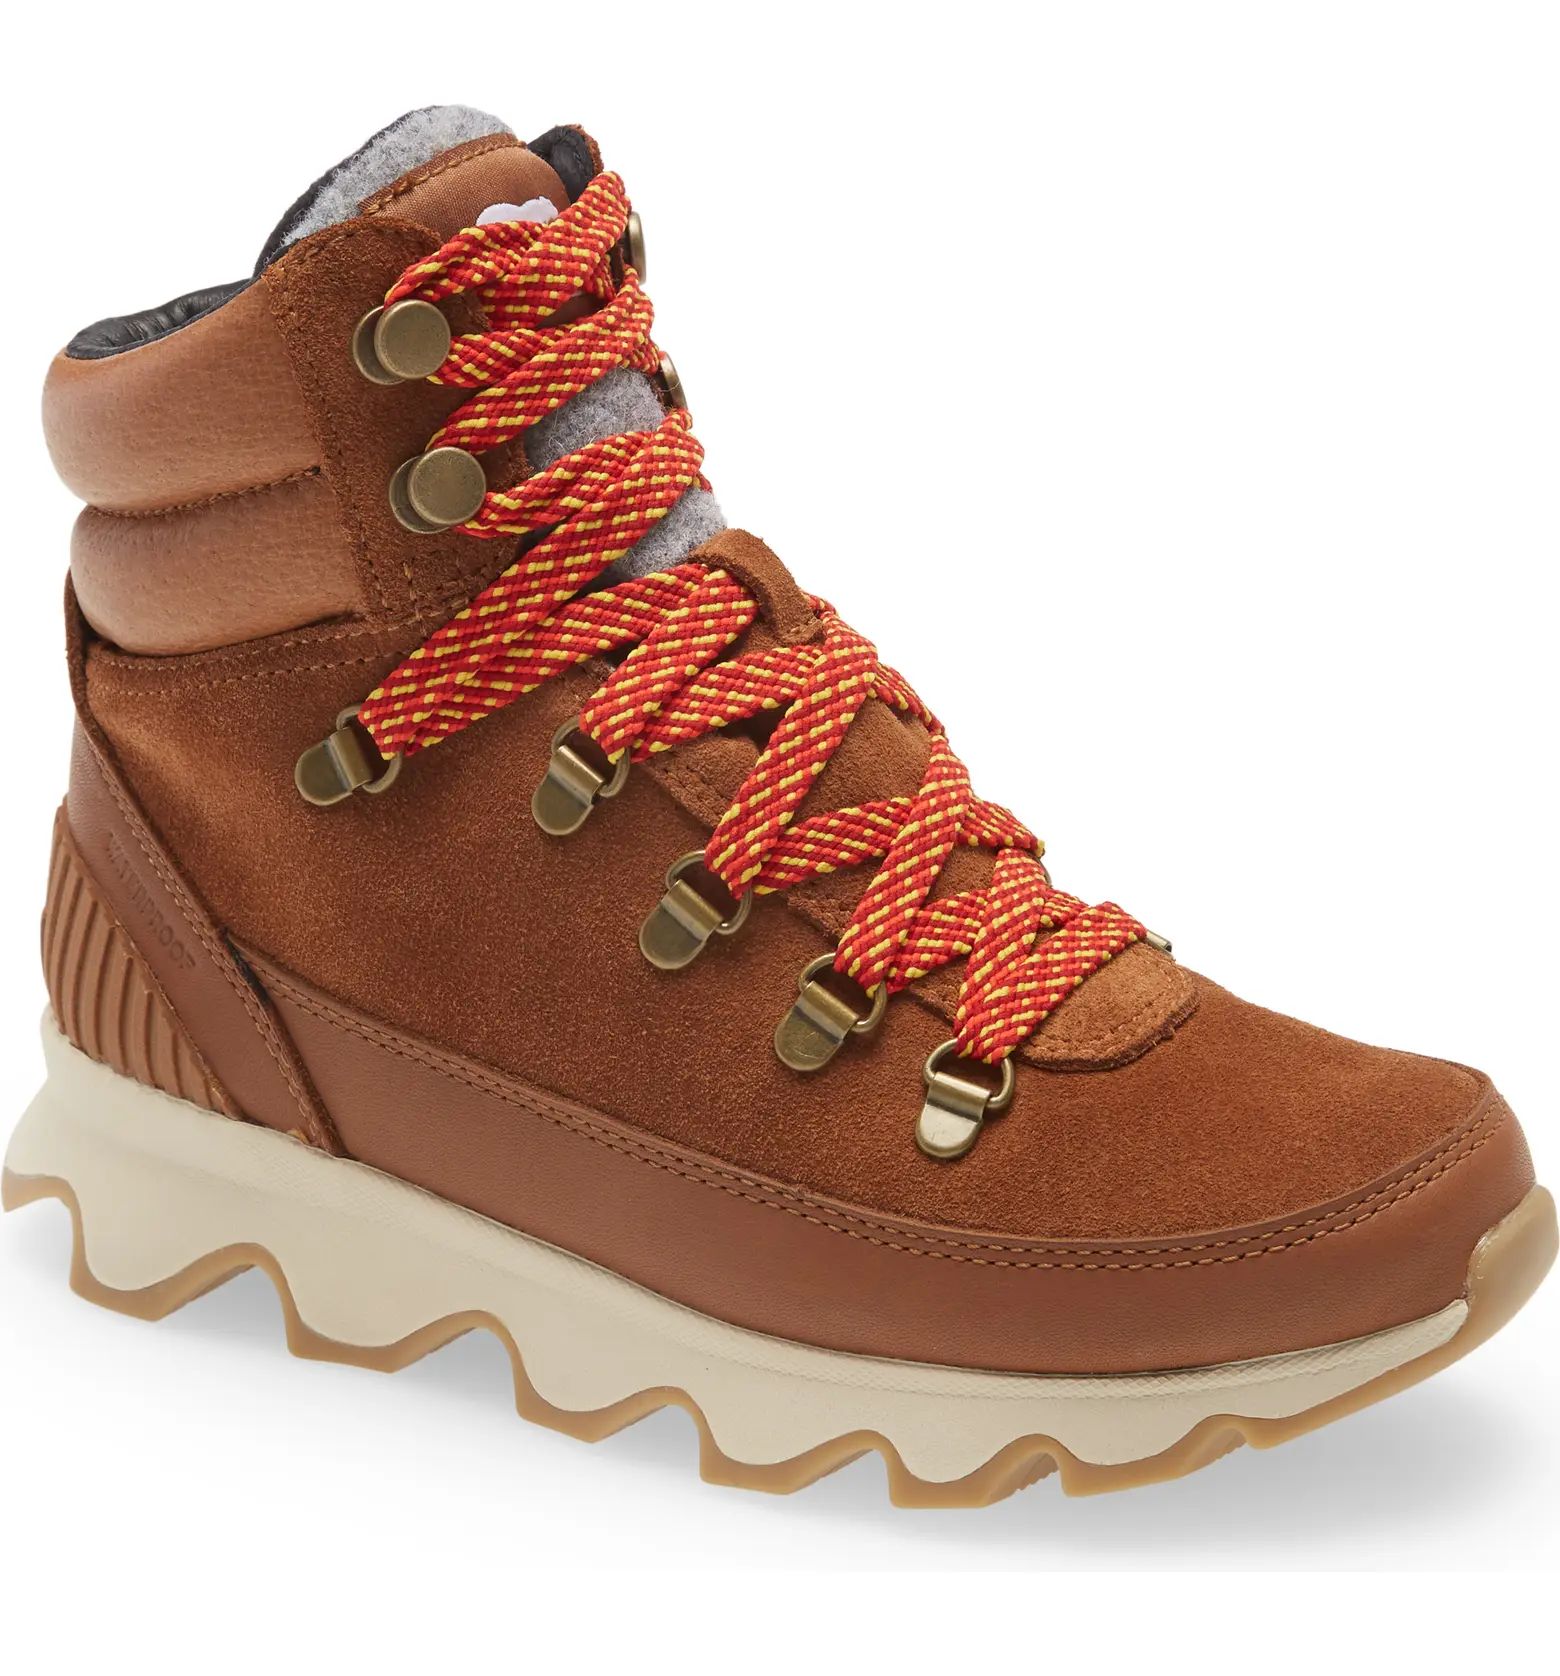 Kinetic Conquest Waterproof Boot | Nordstrom